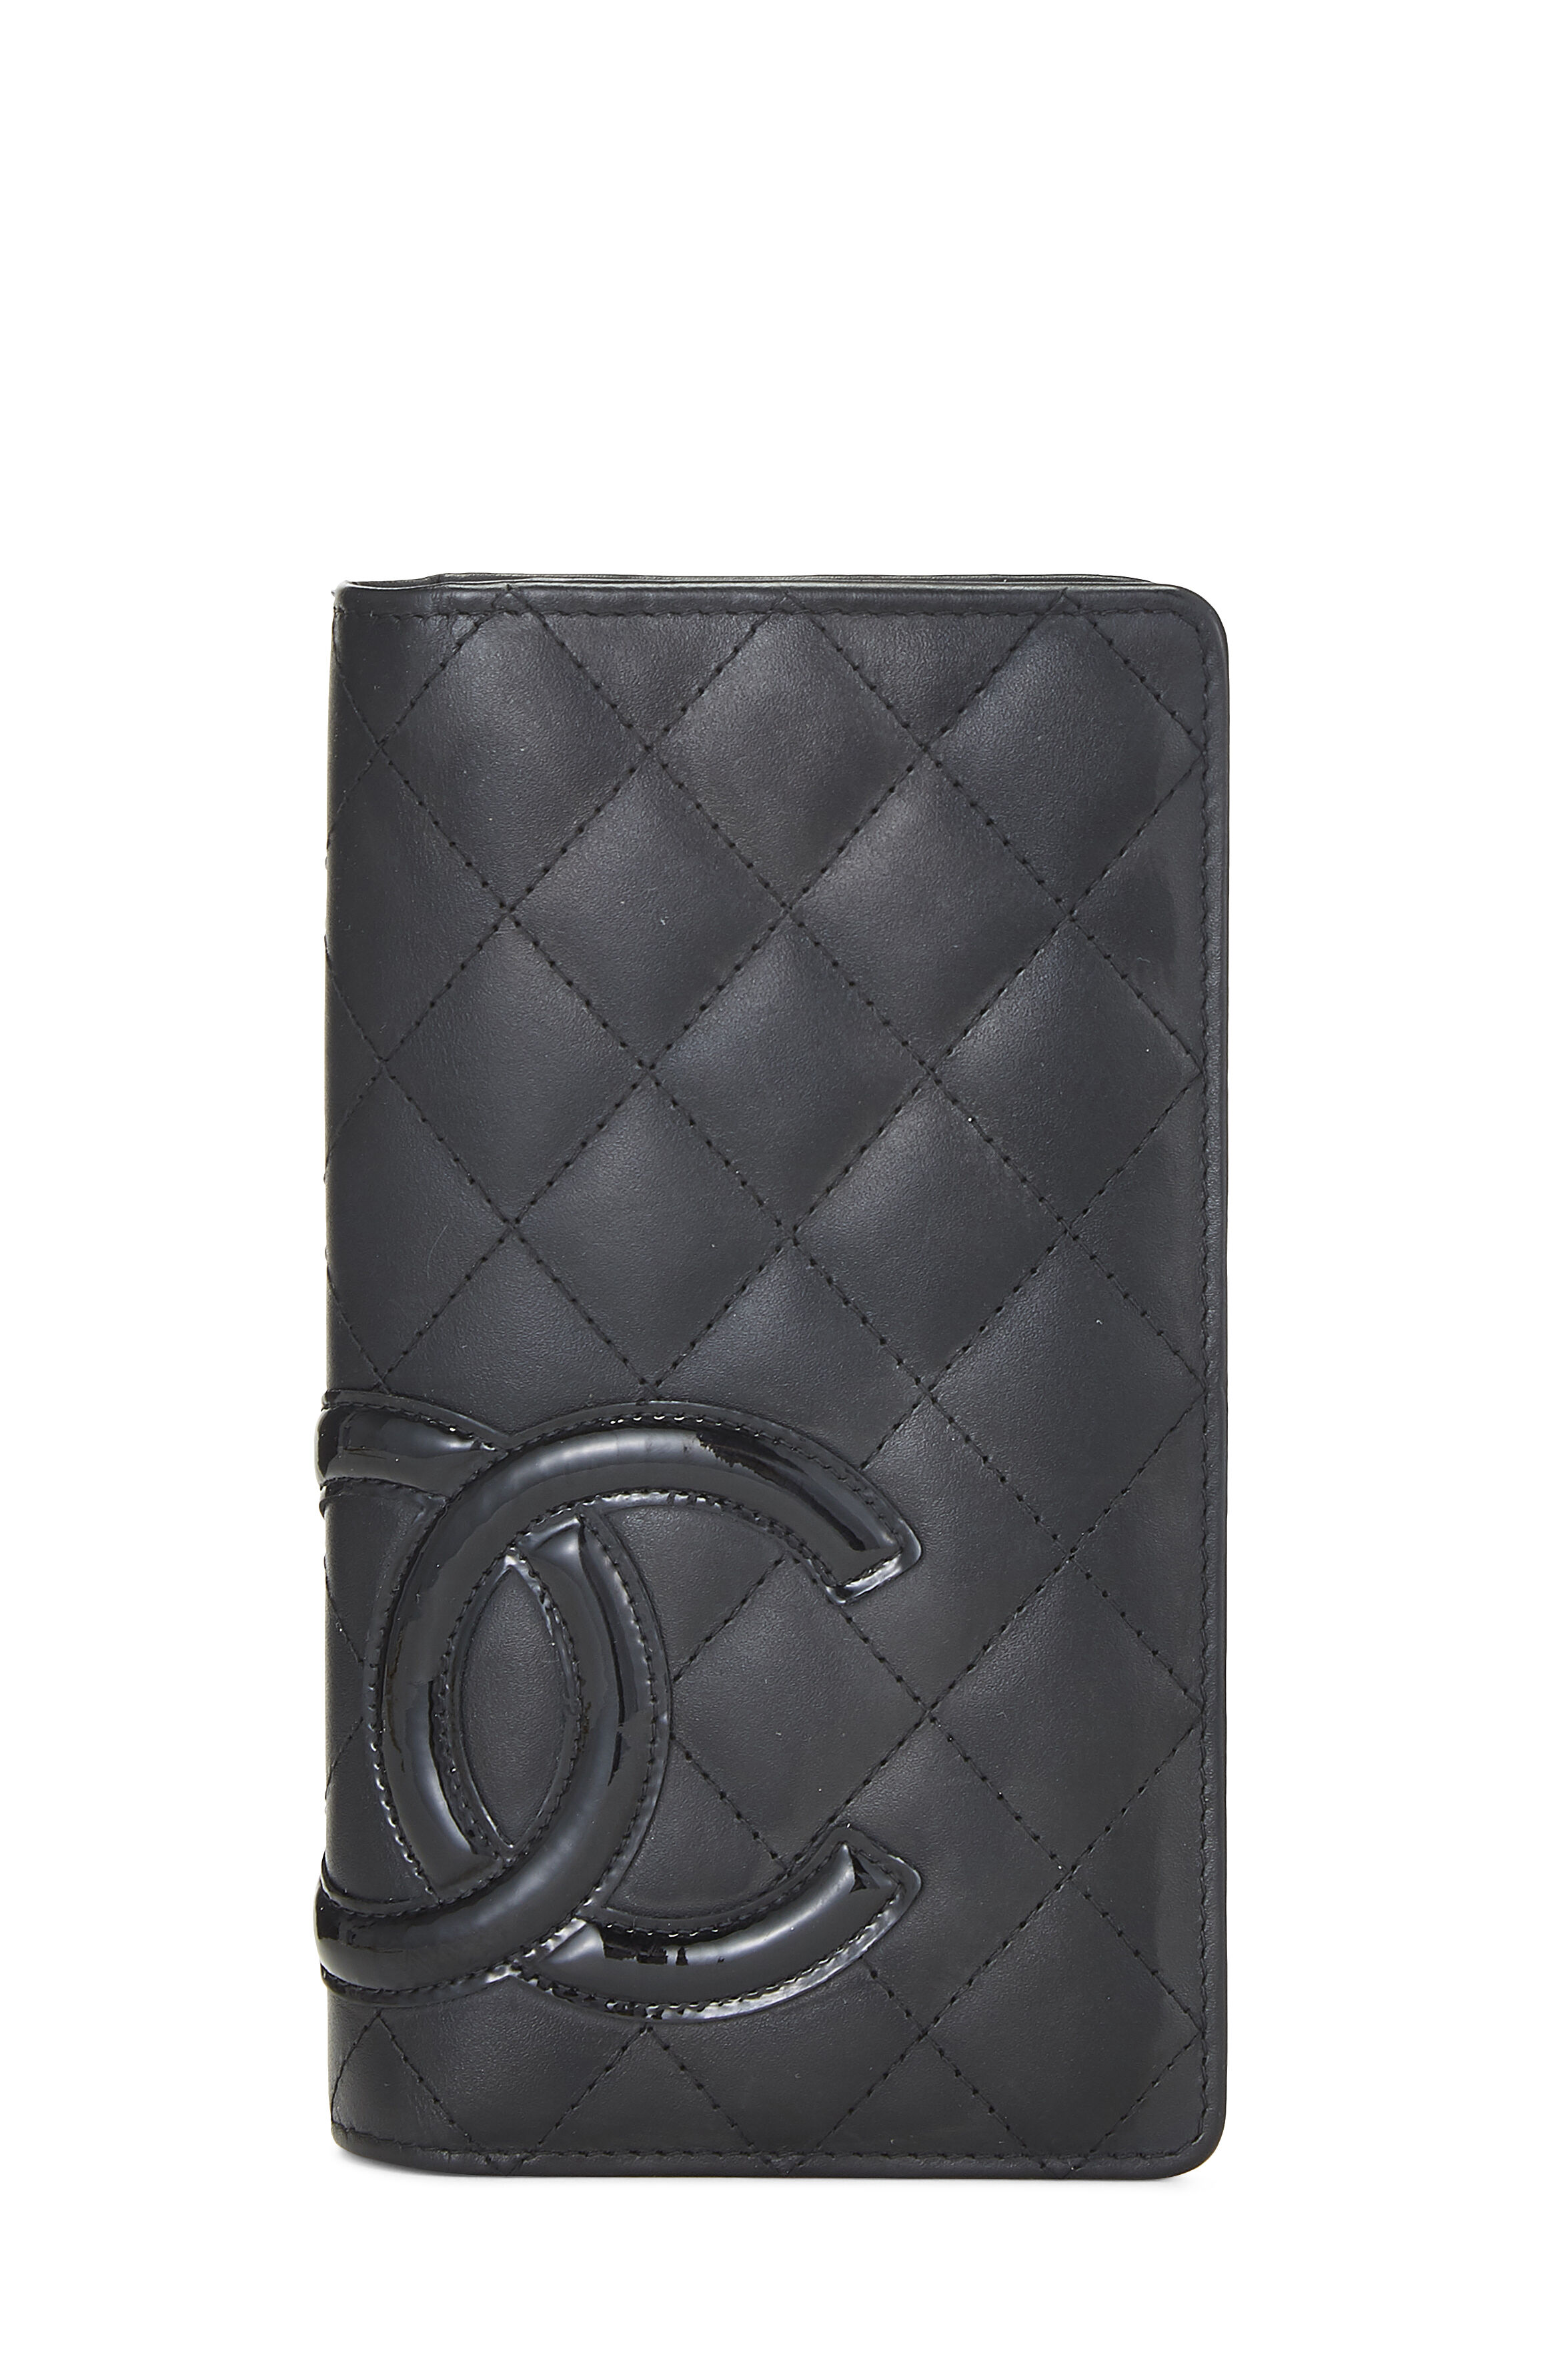 Chanel Black Quilted Calfskin Cambon Ligne Long Wallet Q6A1313PKB016 | WGACA